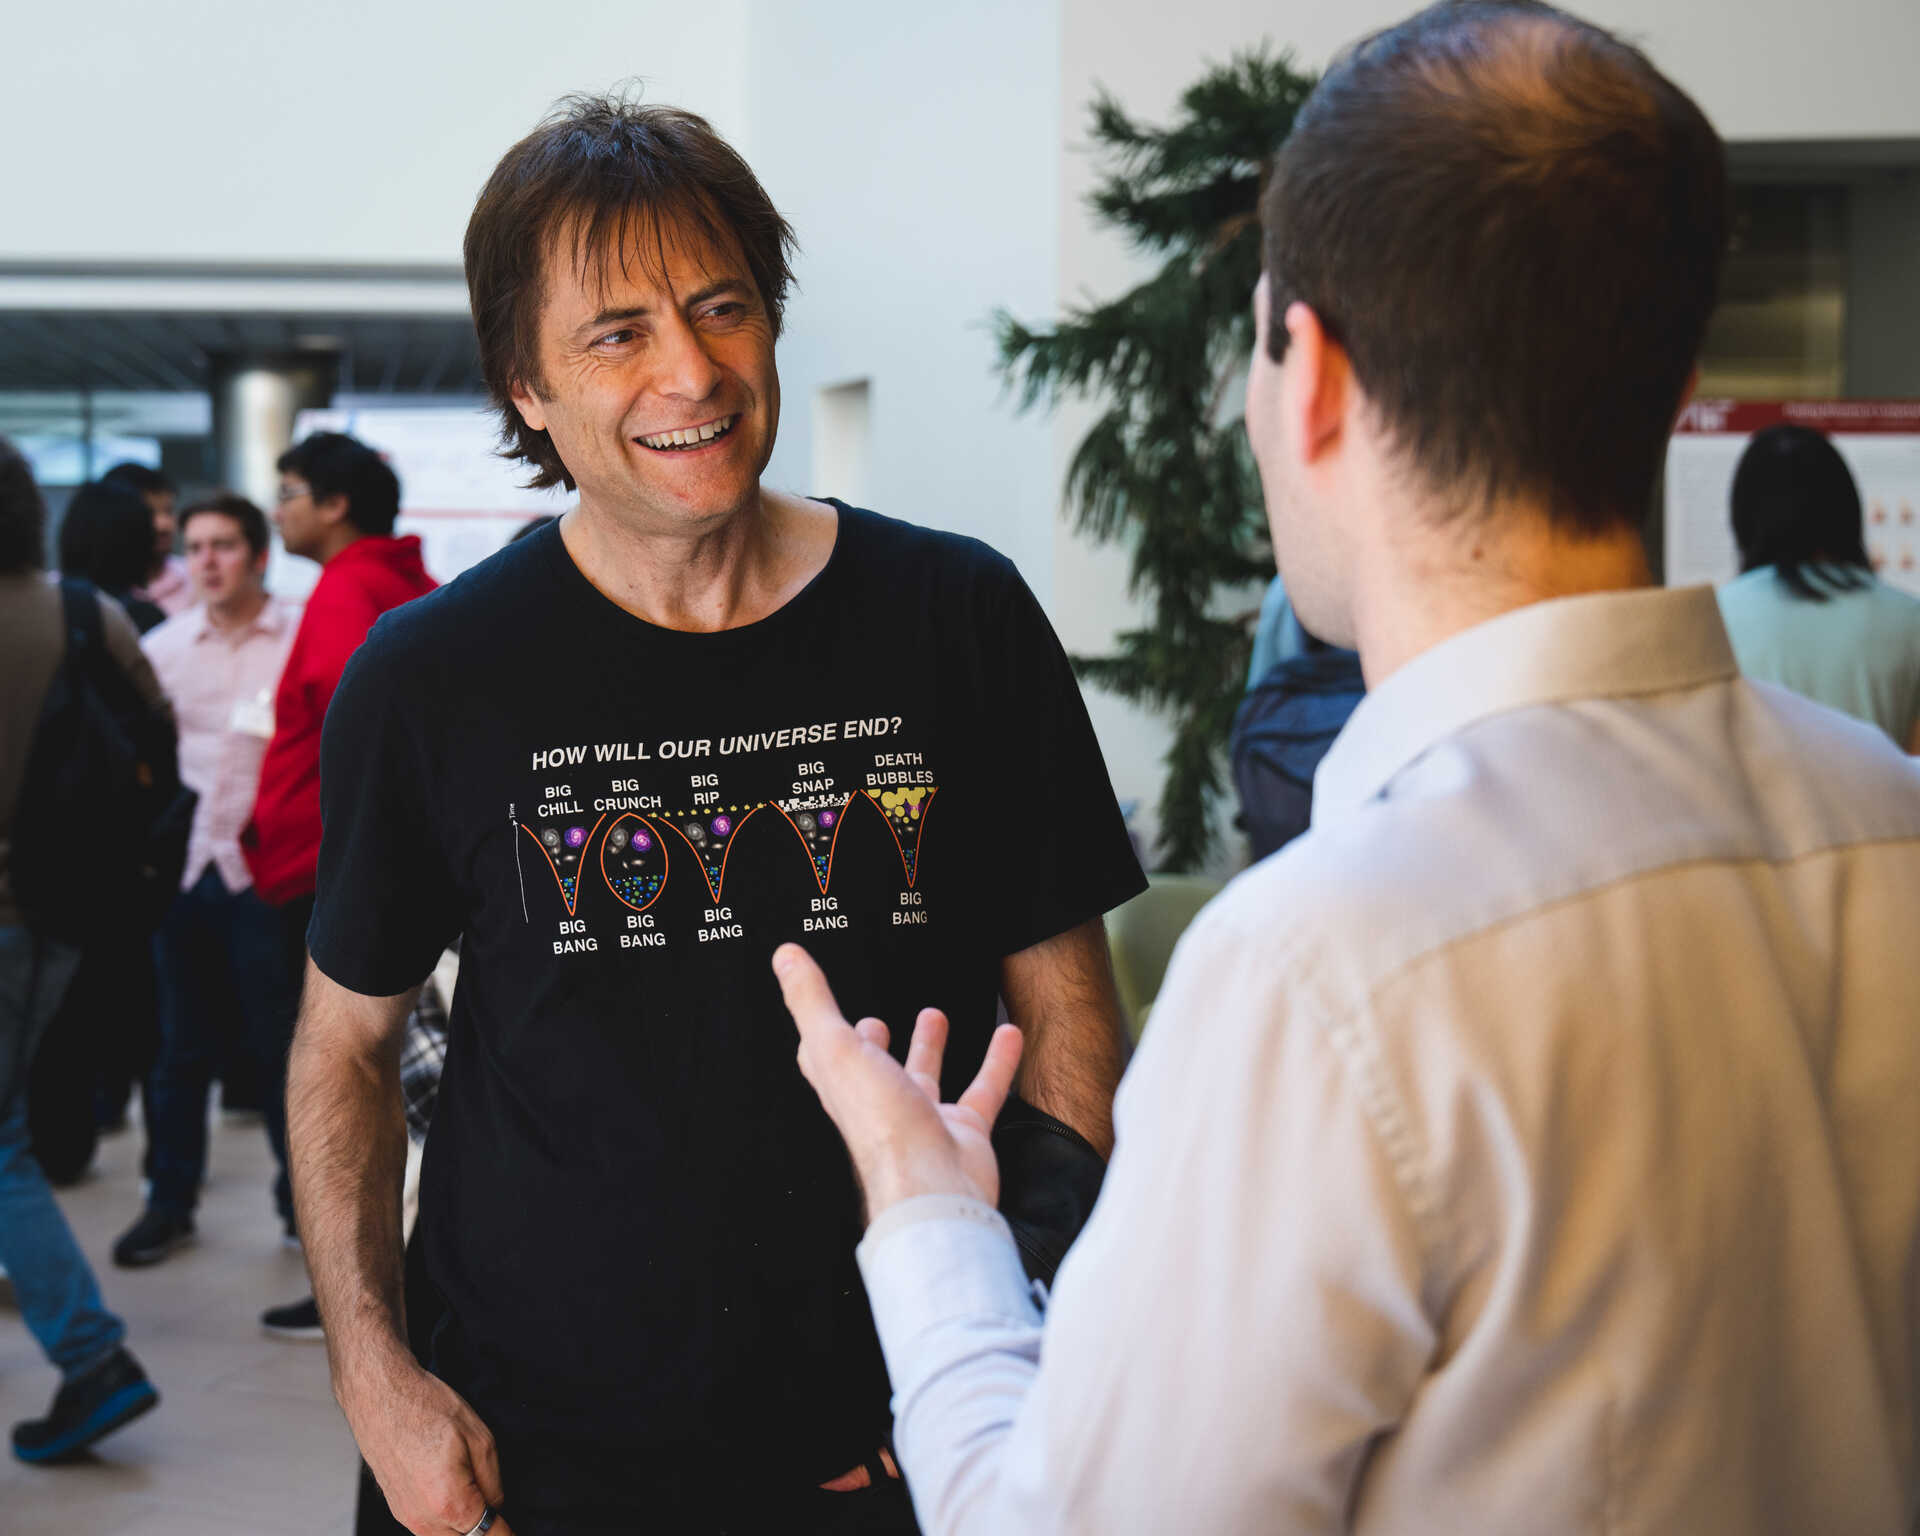 Max Tegmark standing in conversation